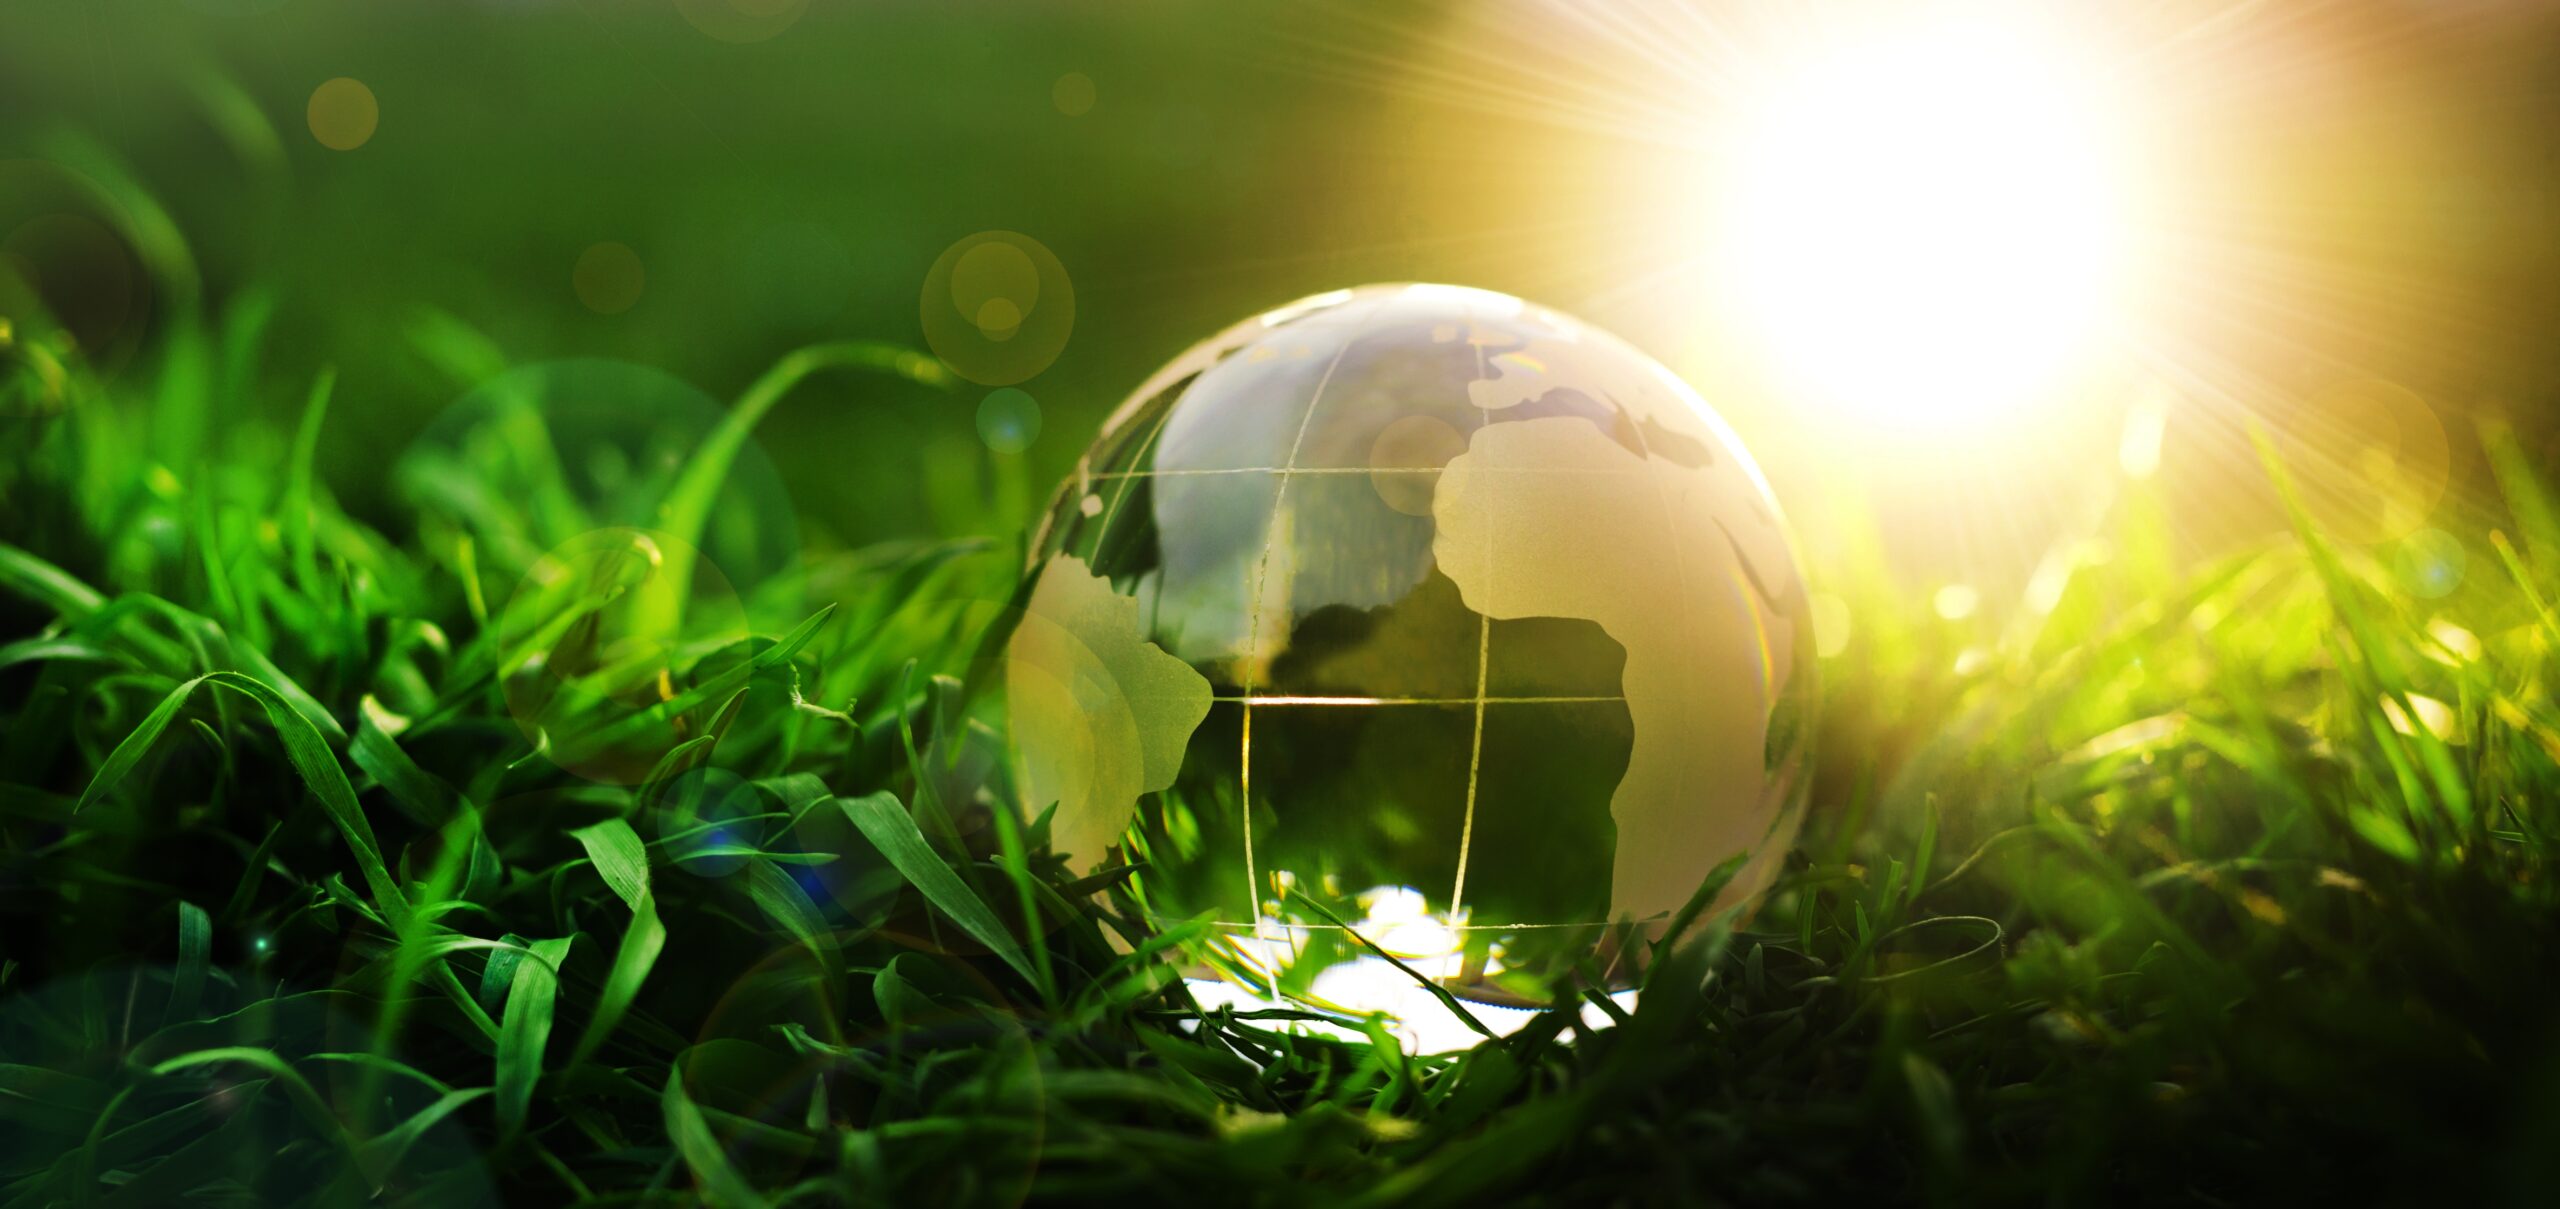 A glass globe resting on vibrant green grass under a bright sun, symbolizing sustainability and environmental consciousness.